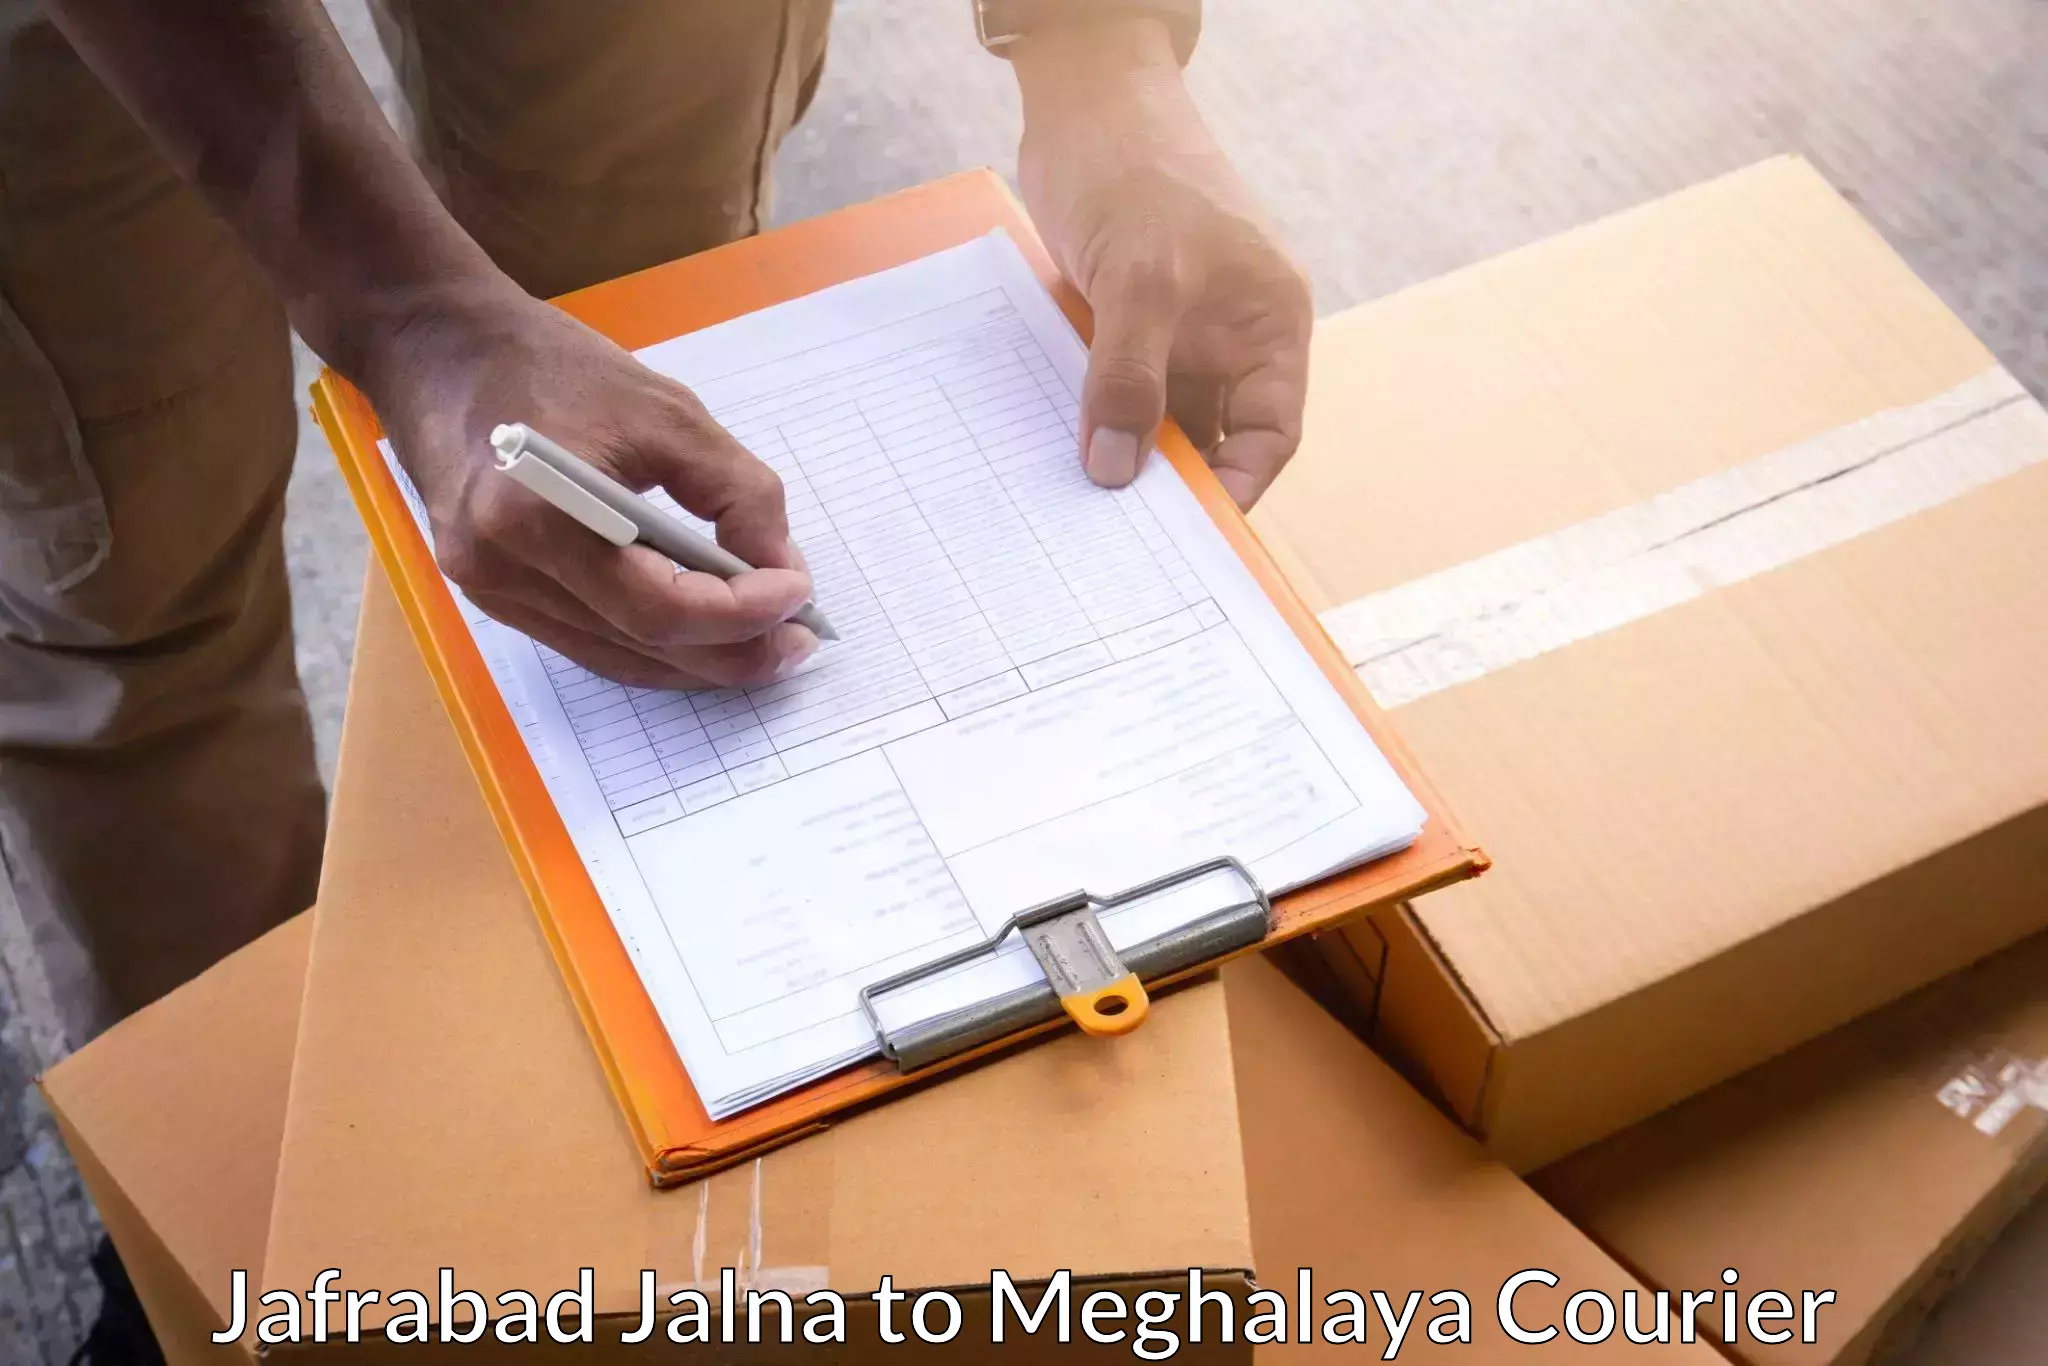 Reliable package handling Jafrabad Jalna to Jowai